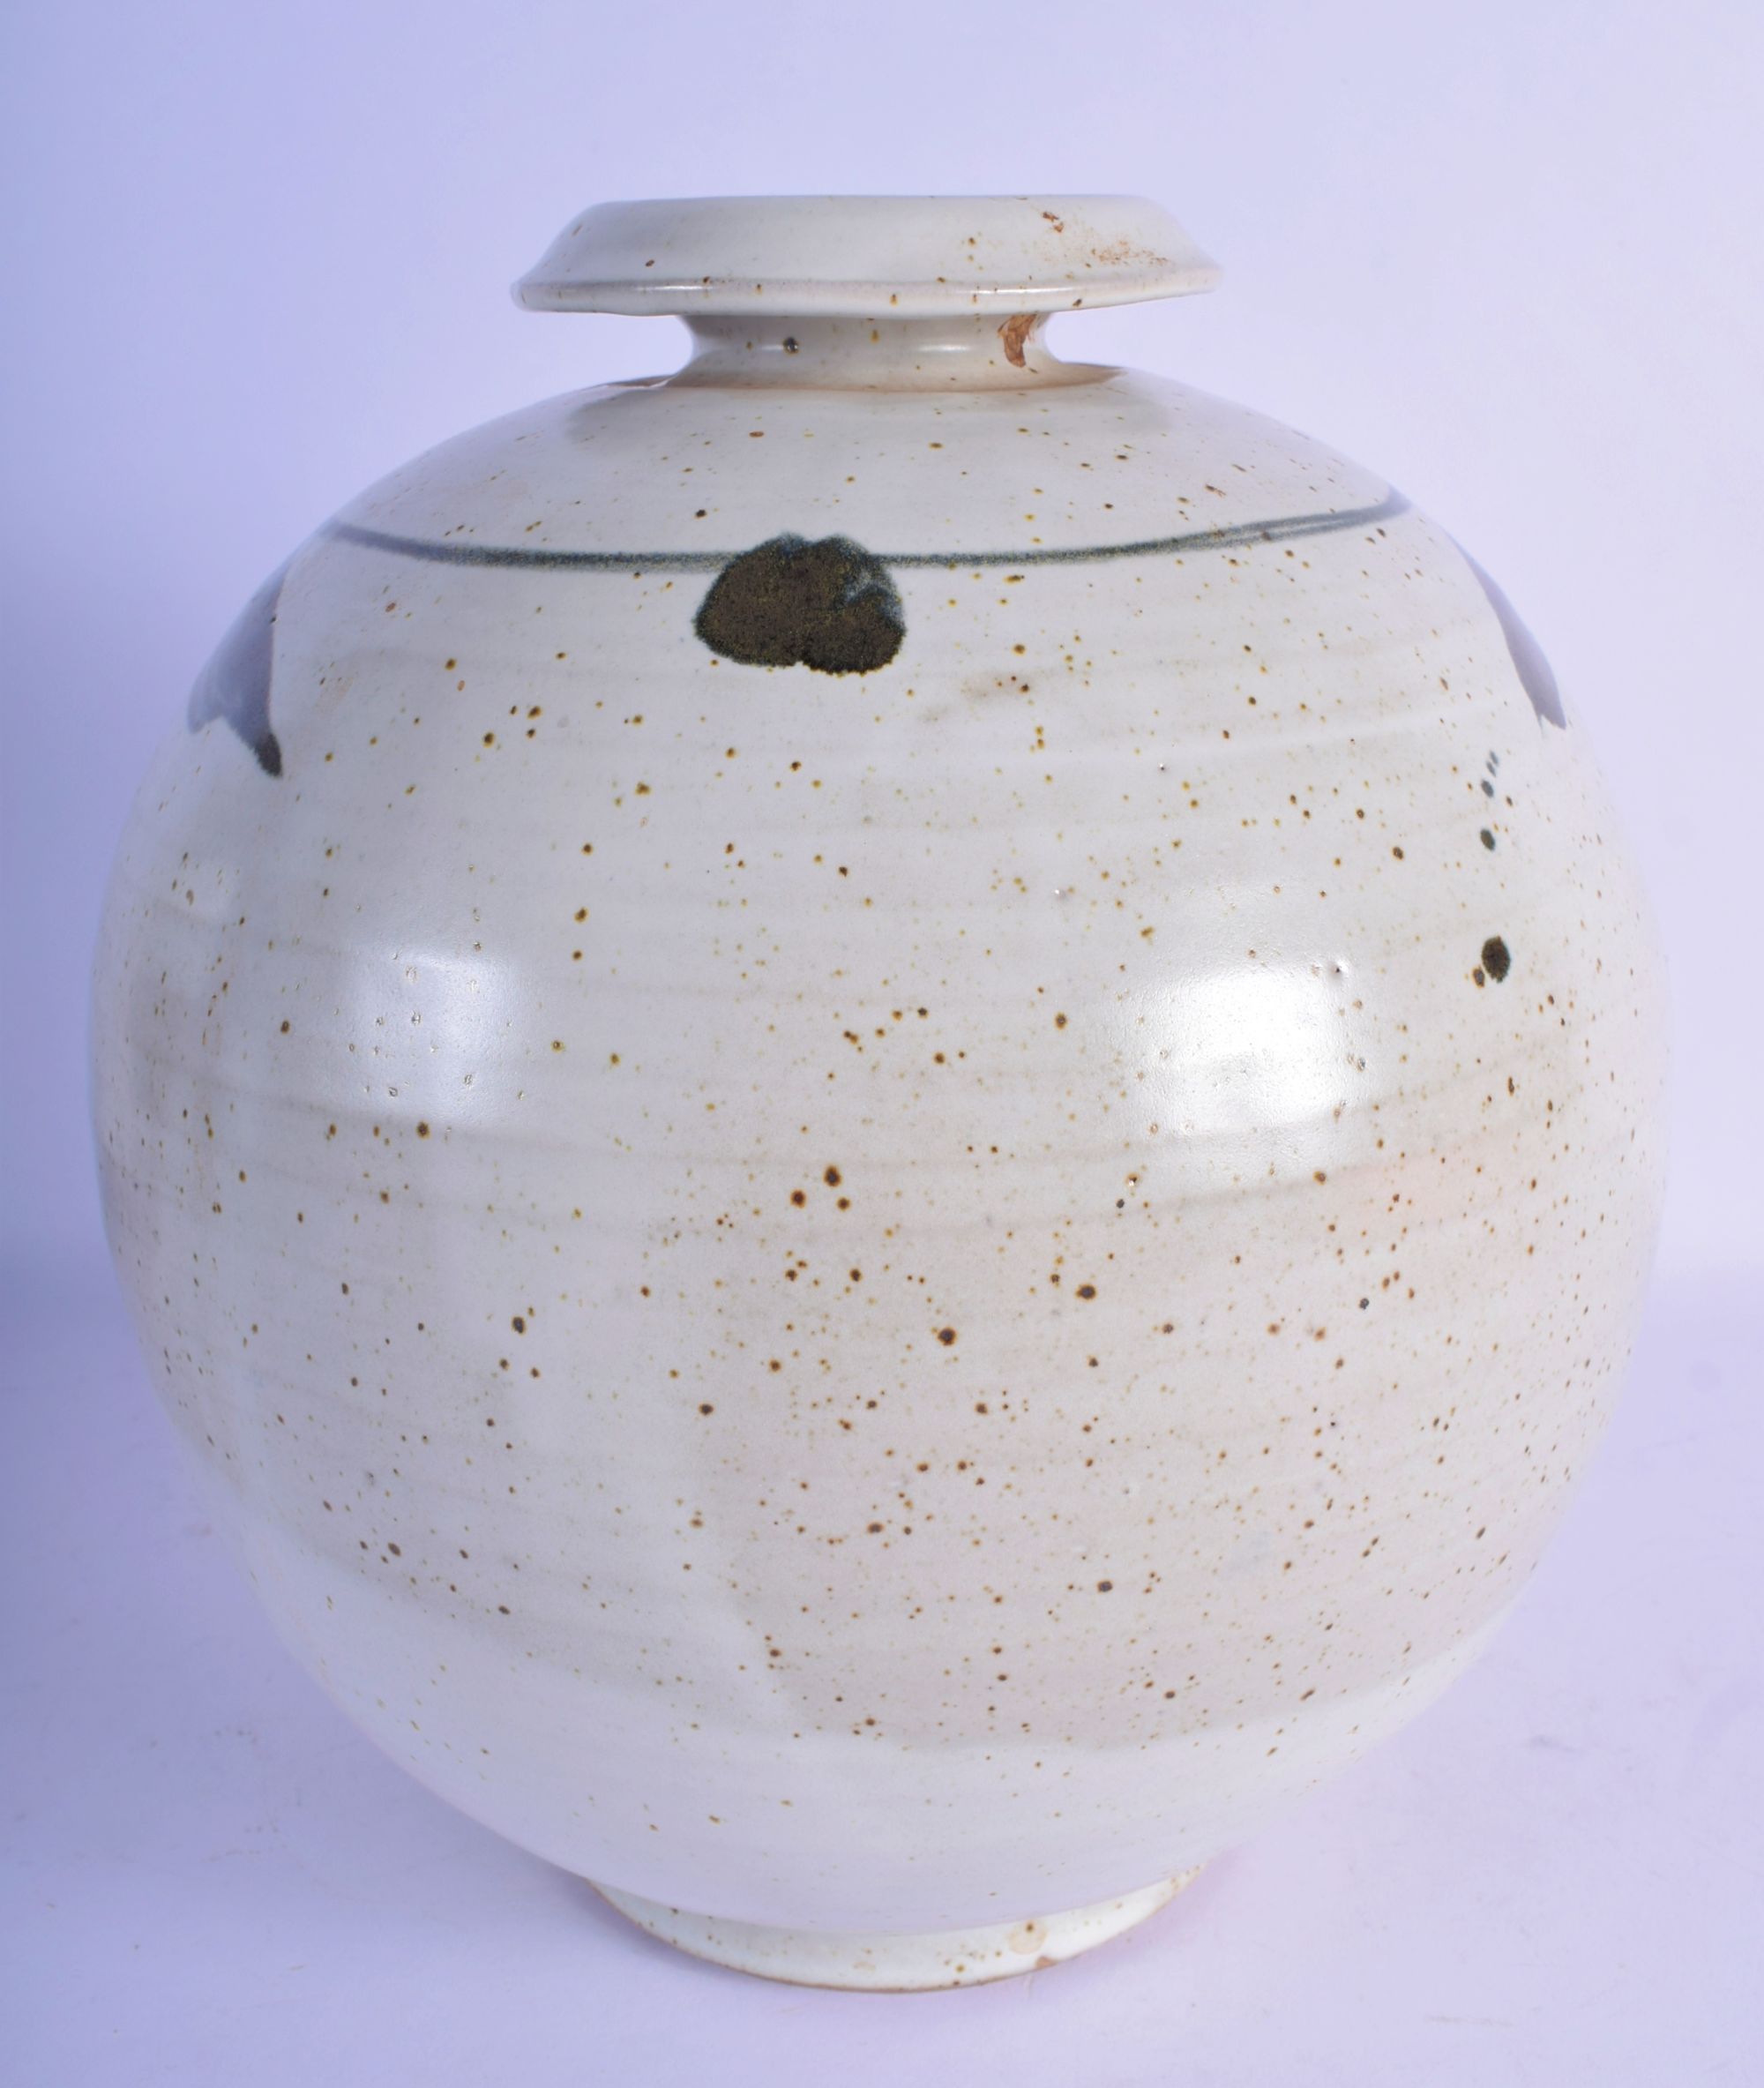 A LARGE STUDIO POTTERY STONEWARE VASE painted with sprays. 26 cm x 18 cm. - Image 3 of 5